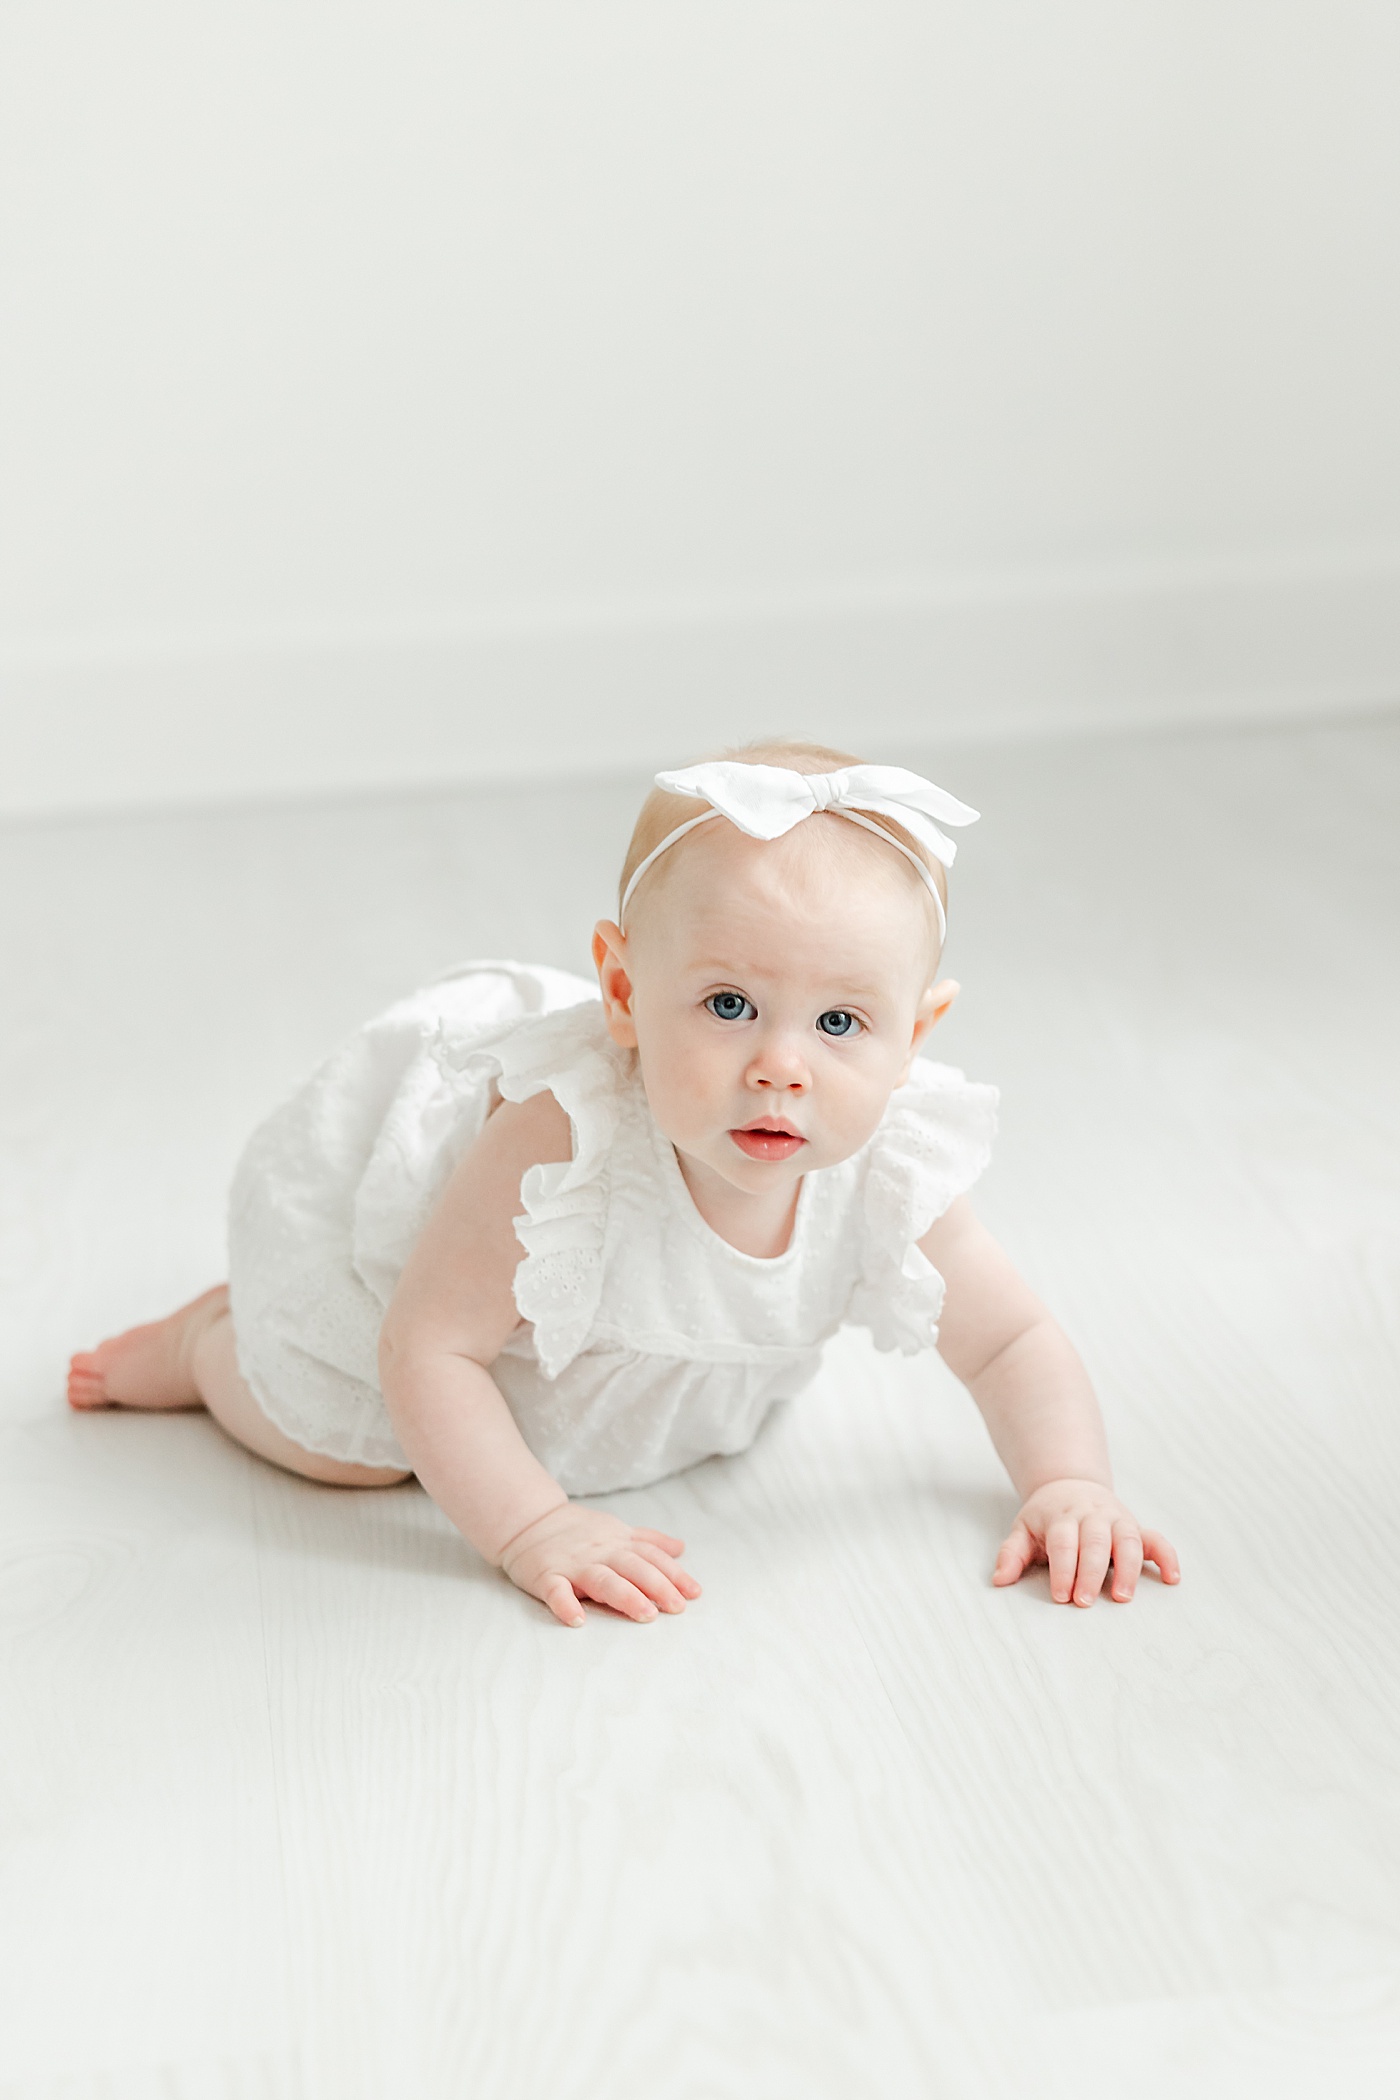 7 month old baby girl crawling | Kristin Wood Photography